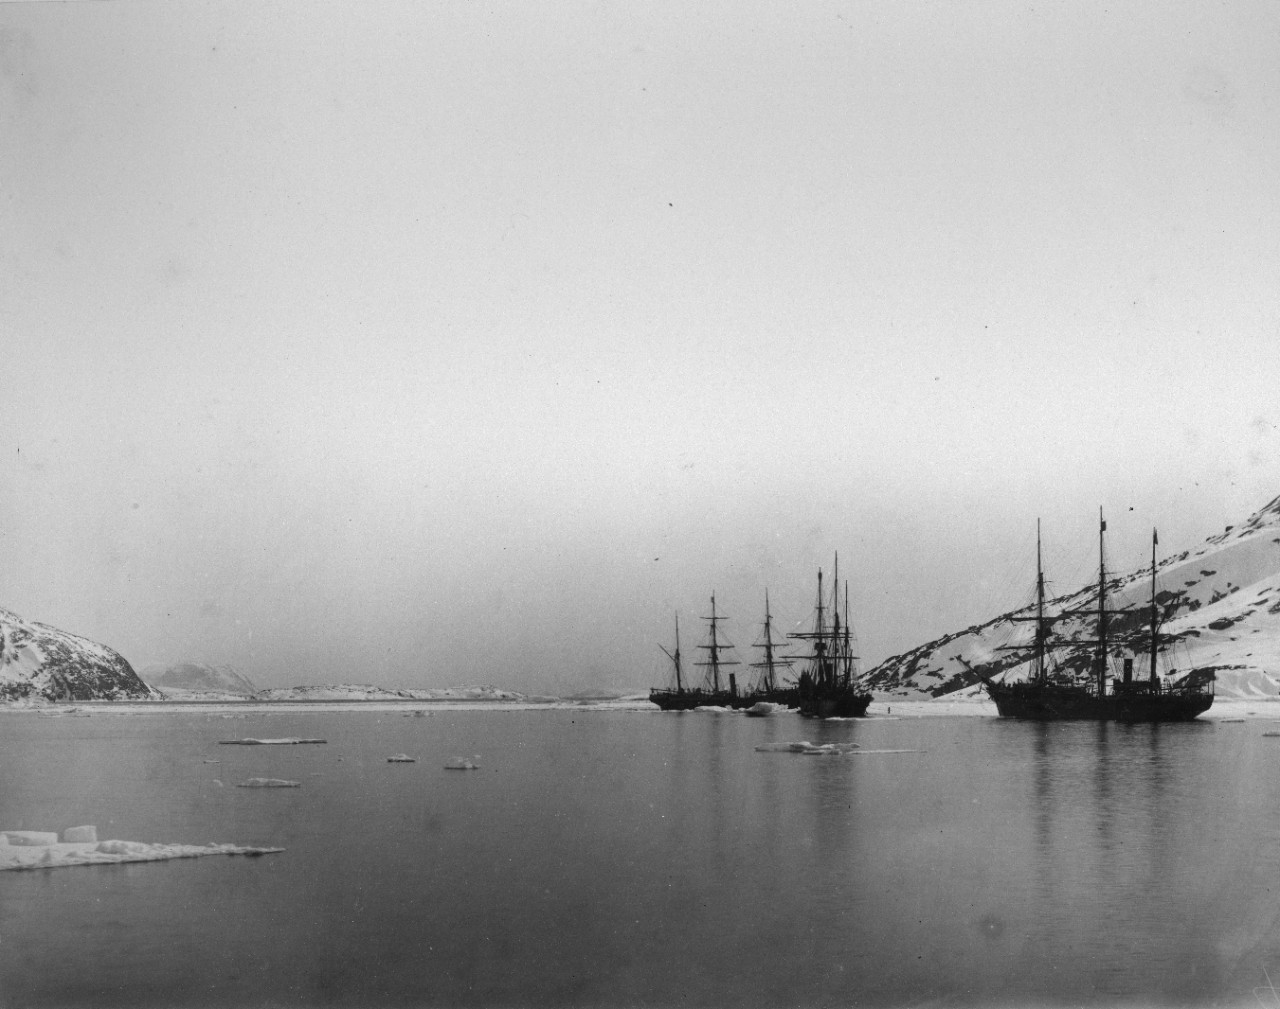 317 black and white and sepia photographs mounted on cardboard, showing the 1884 U.S. Navy expedition, led by Captain Winfield Schley, to rescue the stranded U.S. Army mission exploration mission commanded by Lieutenant Adolphus W. Greely, the Lady Franklin Bay Expedition. Ships seen include USS Thetis, USS Bear, USS Alert, Loch Garry, as well as numerous whalers. Many locations in Greenland, Newfoundland, and New Hampshire, with dramatic ice and snow landscapes. Good images of local population. Views of equipment used in the expedition, in particular various types of sleds. Much of this imagery overlaps with the USN 900000 series. Some photos have also been assigned NH numbers.